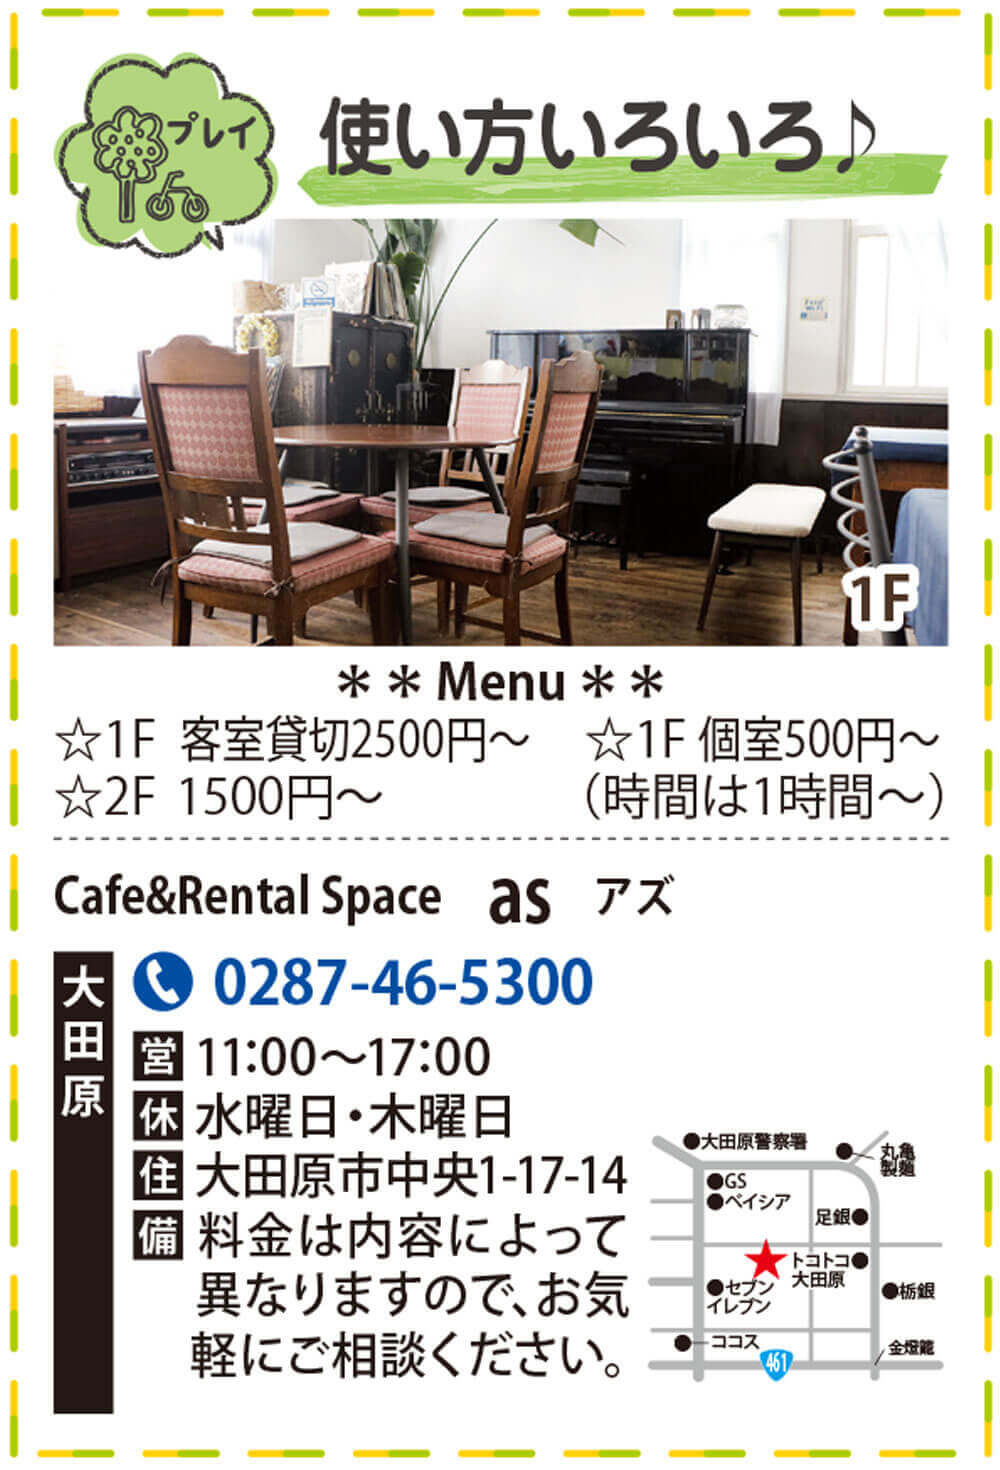 Cafe&Rental Space　as